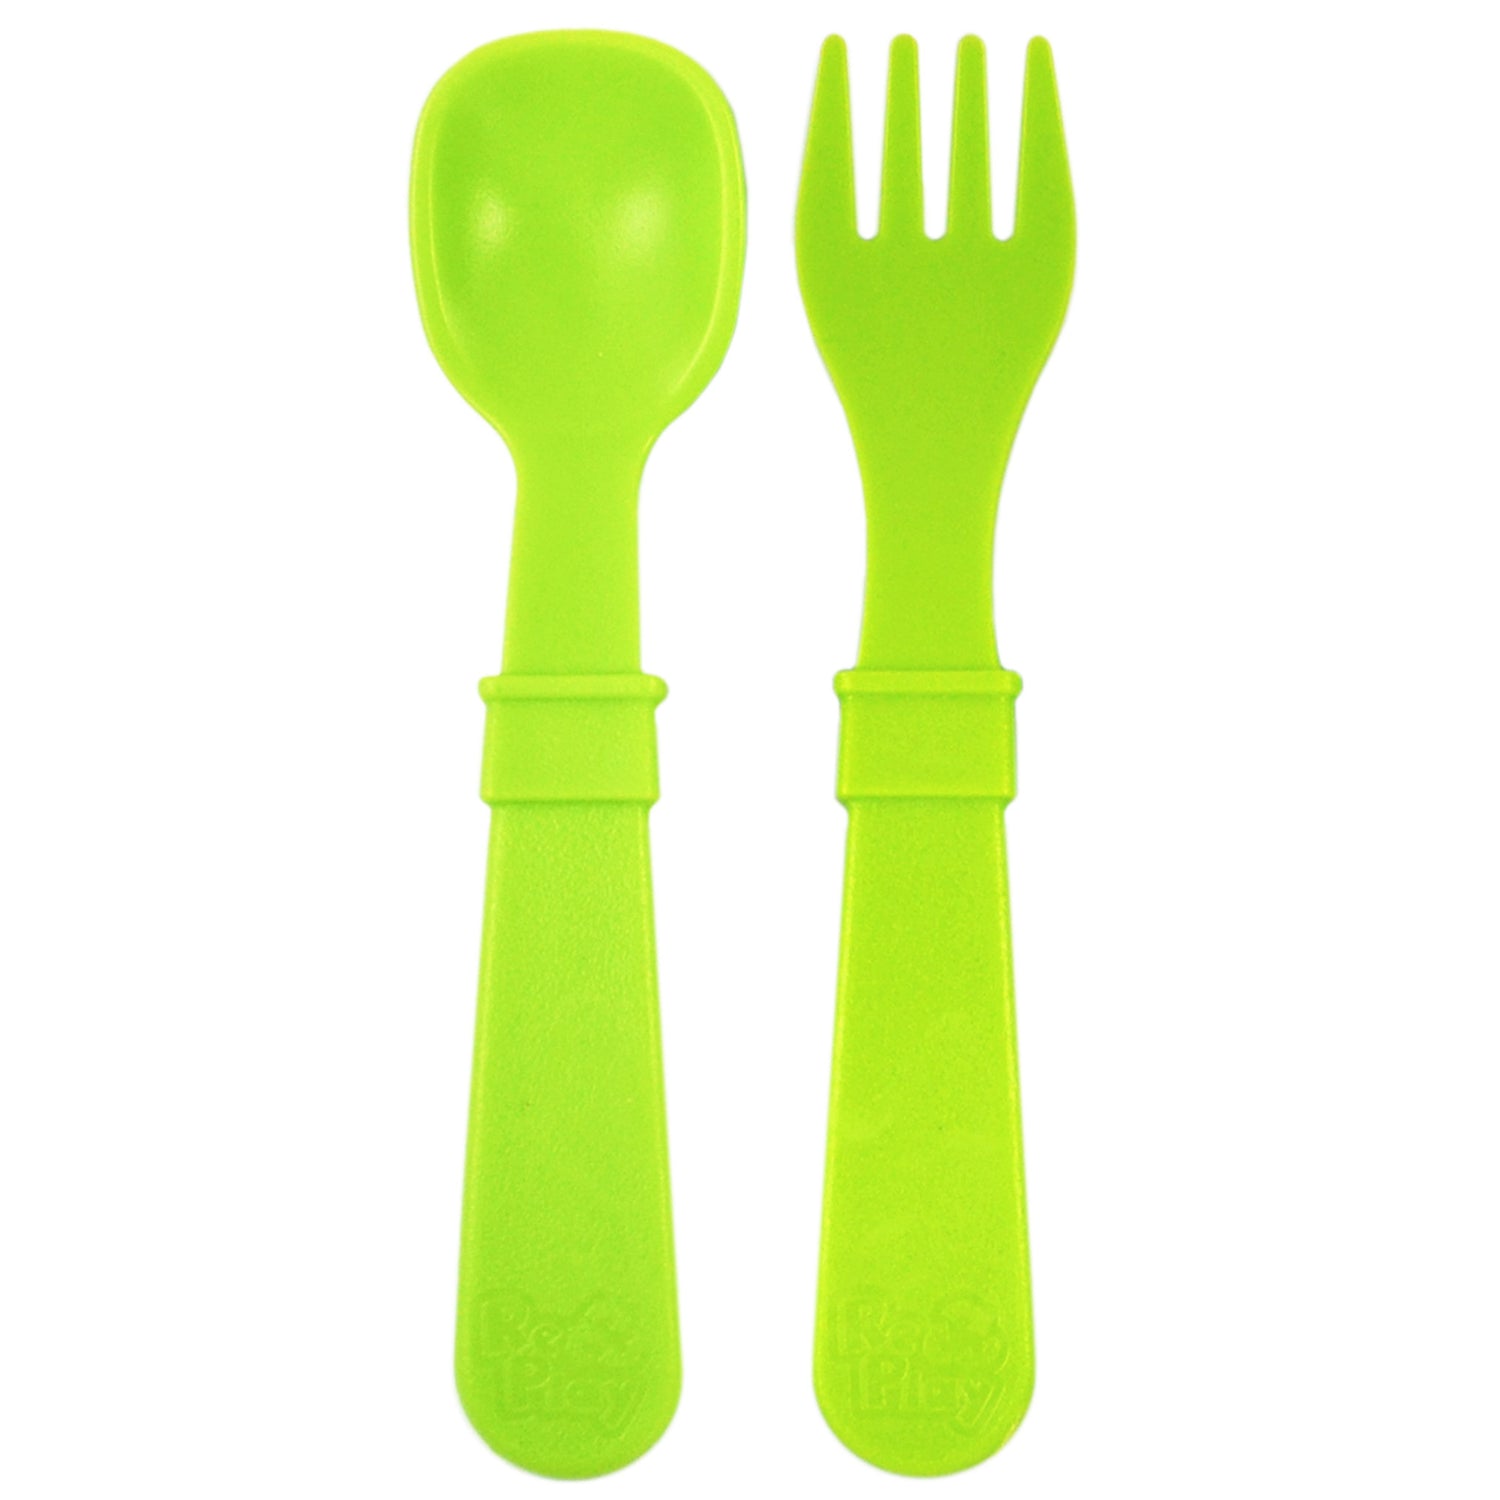 Re-Play Spoon and Fork Set - Light Green - BabyBento